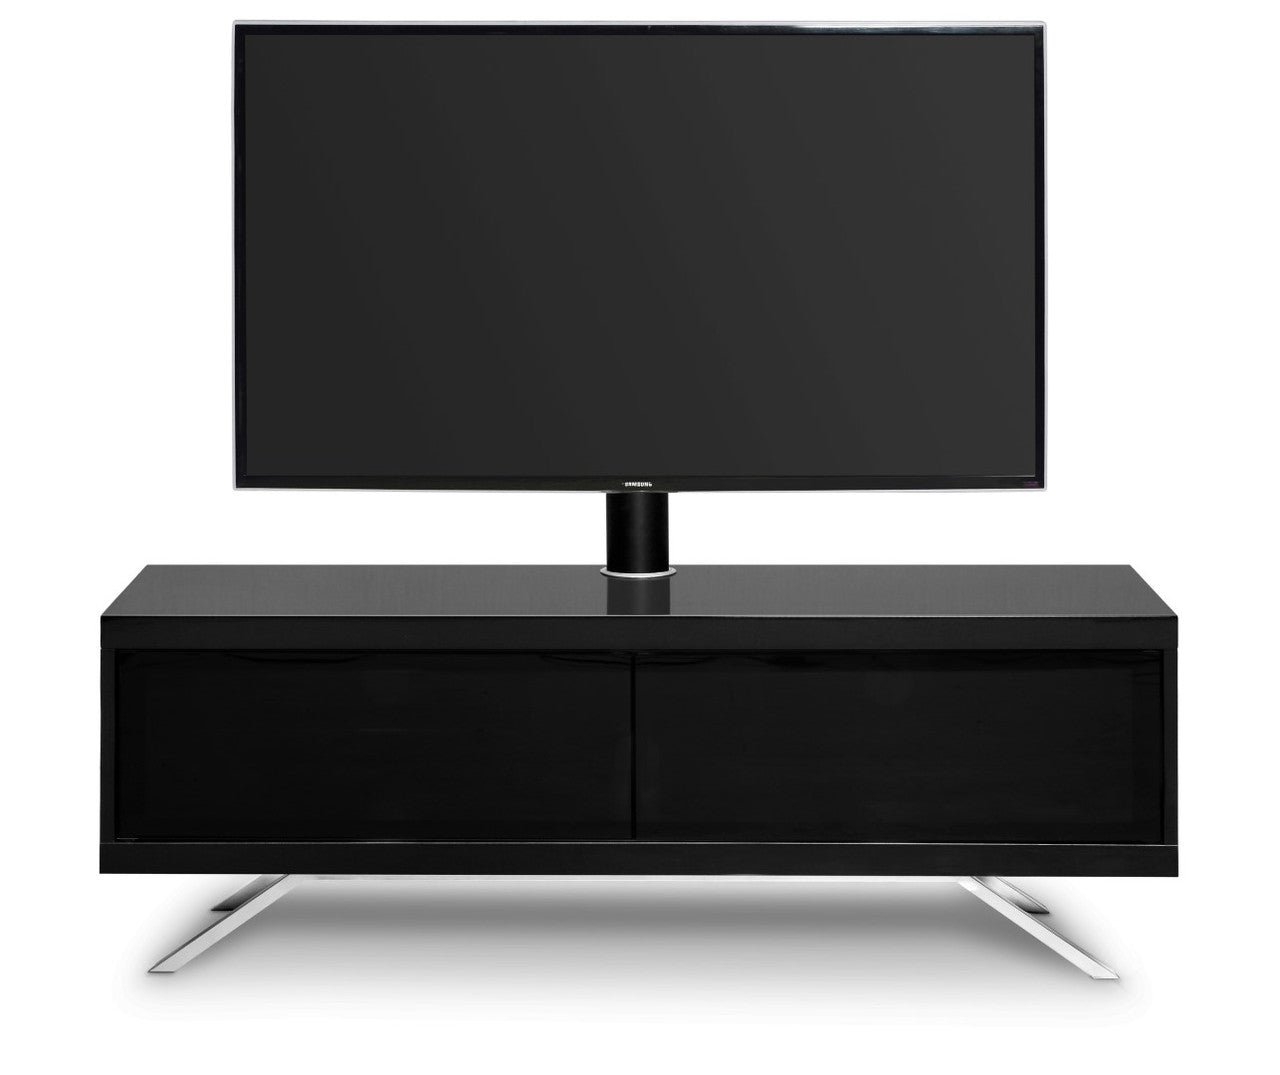 MDA Designs Tucana 1200 Black Hybrid TV Unit Stand for TVs Up To 60 Inches with Screen Mount